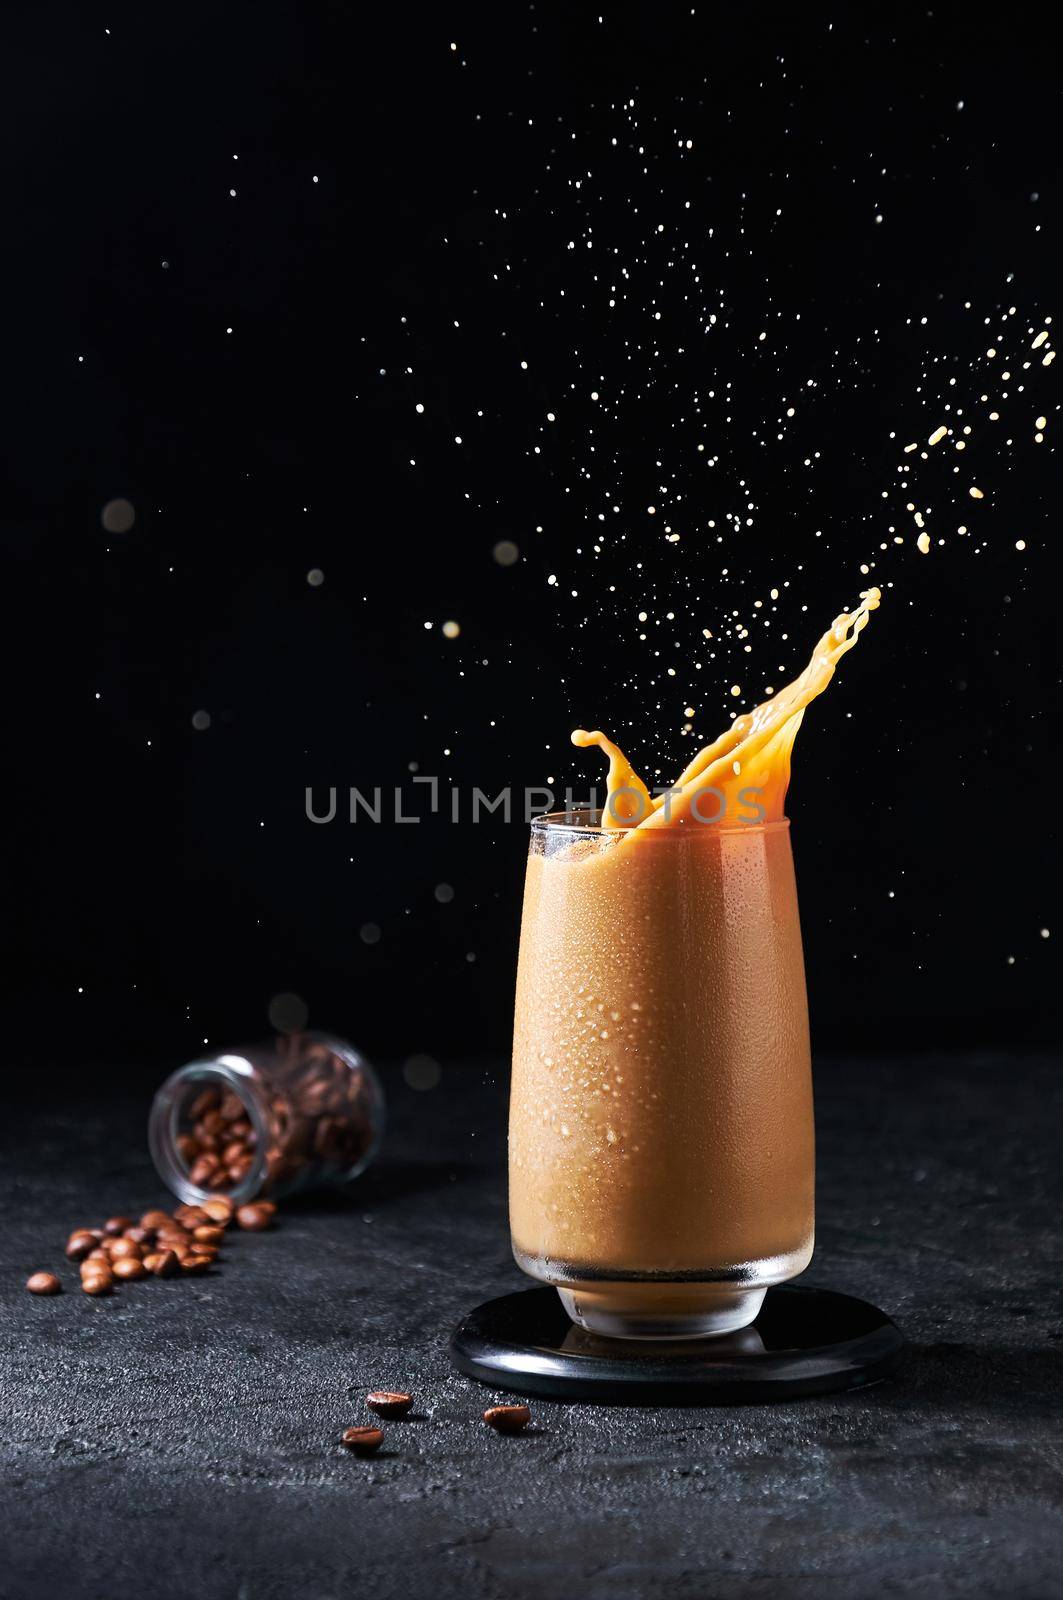 Cold Summer Drink. Iced Coffee with Splash in Tall Glass on Dark Background. Drinks in Motion.